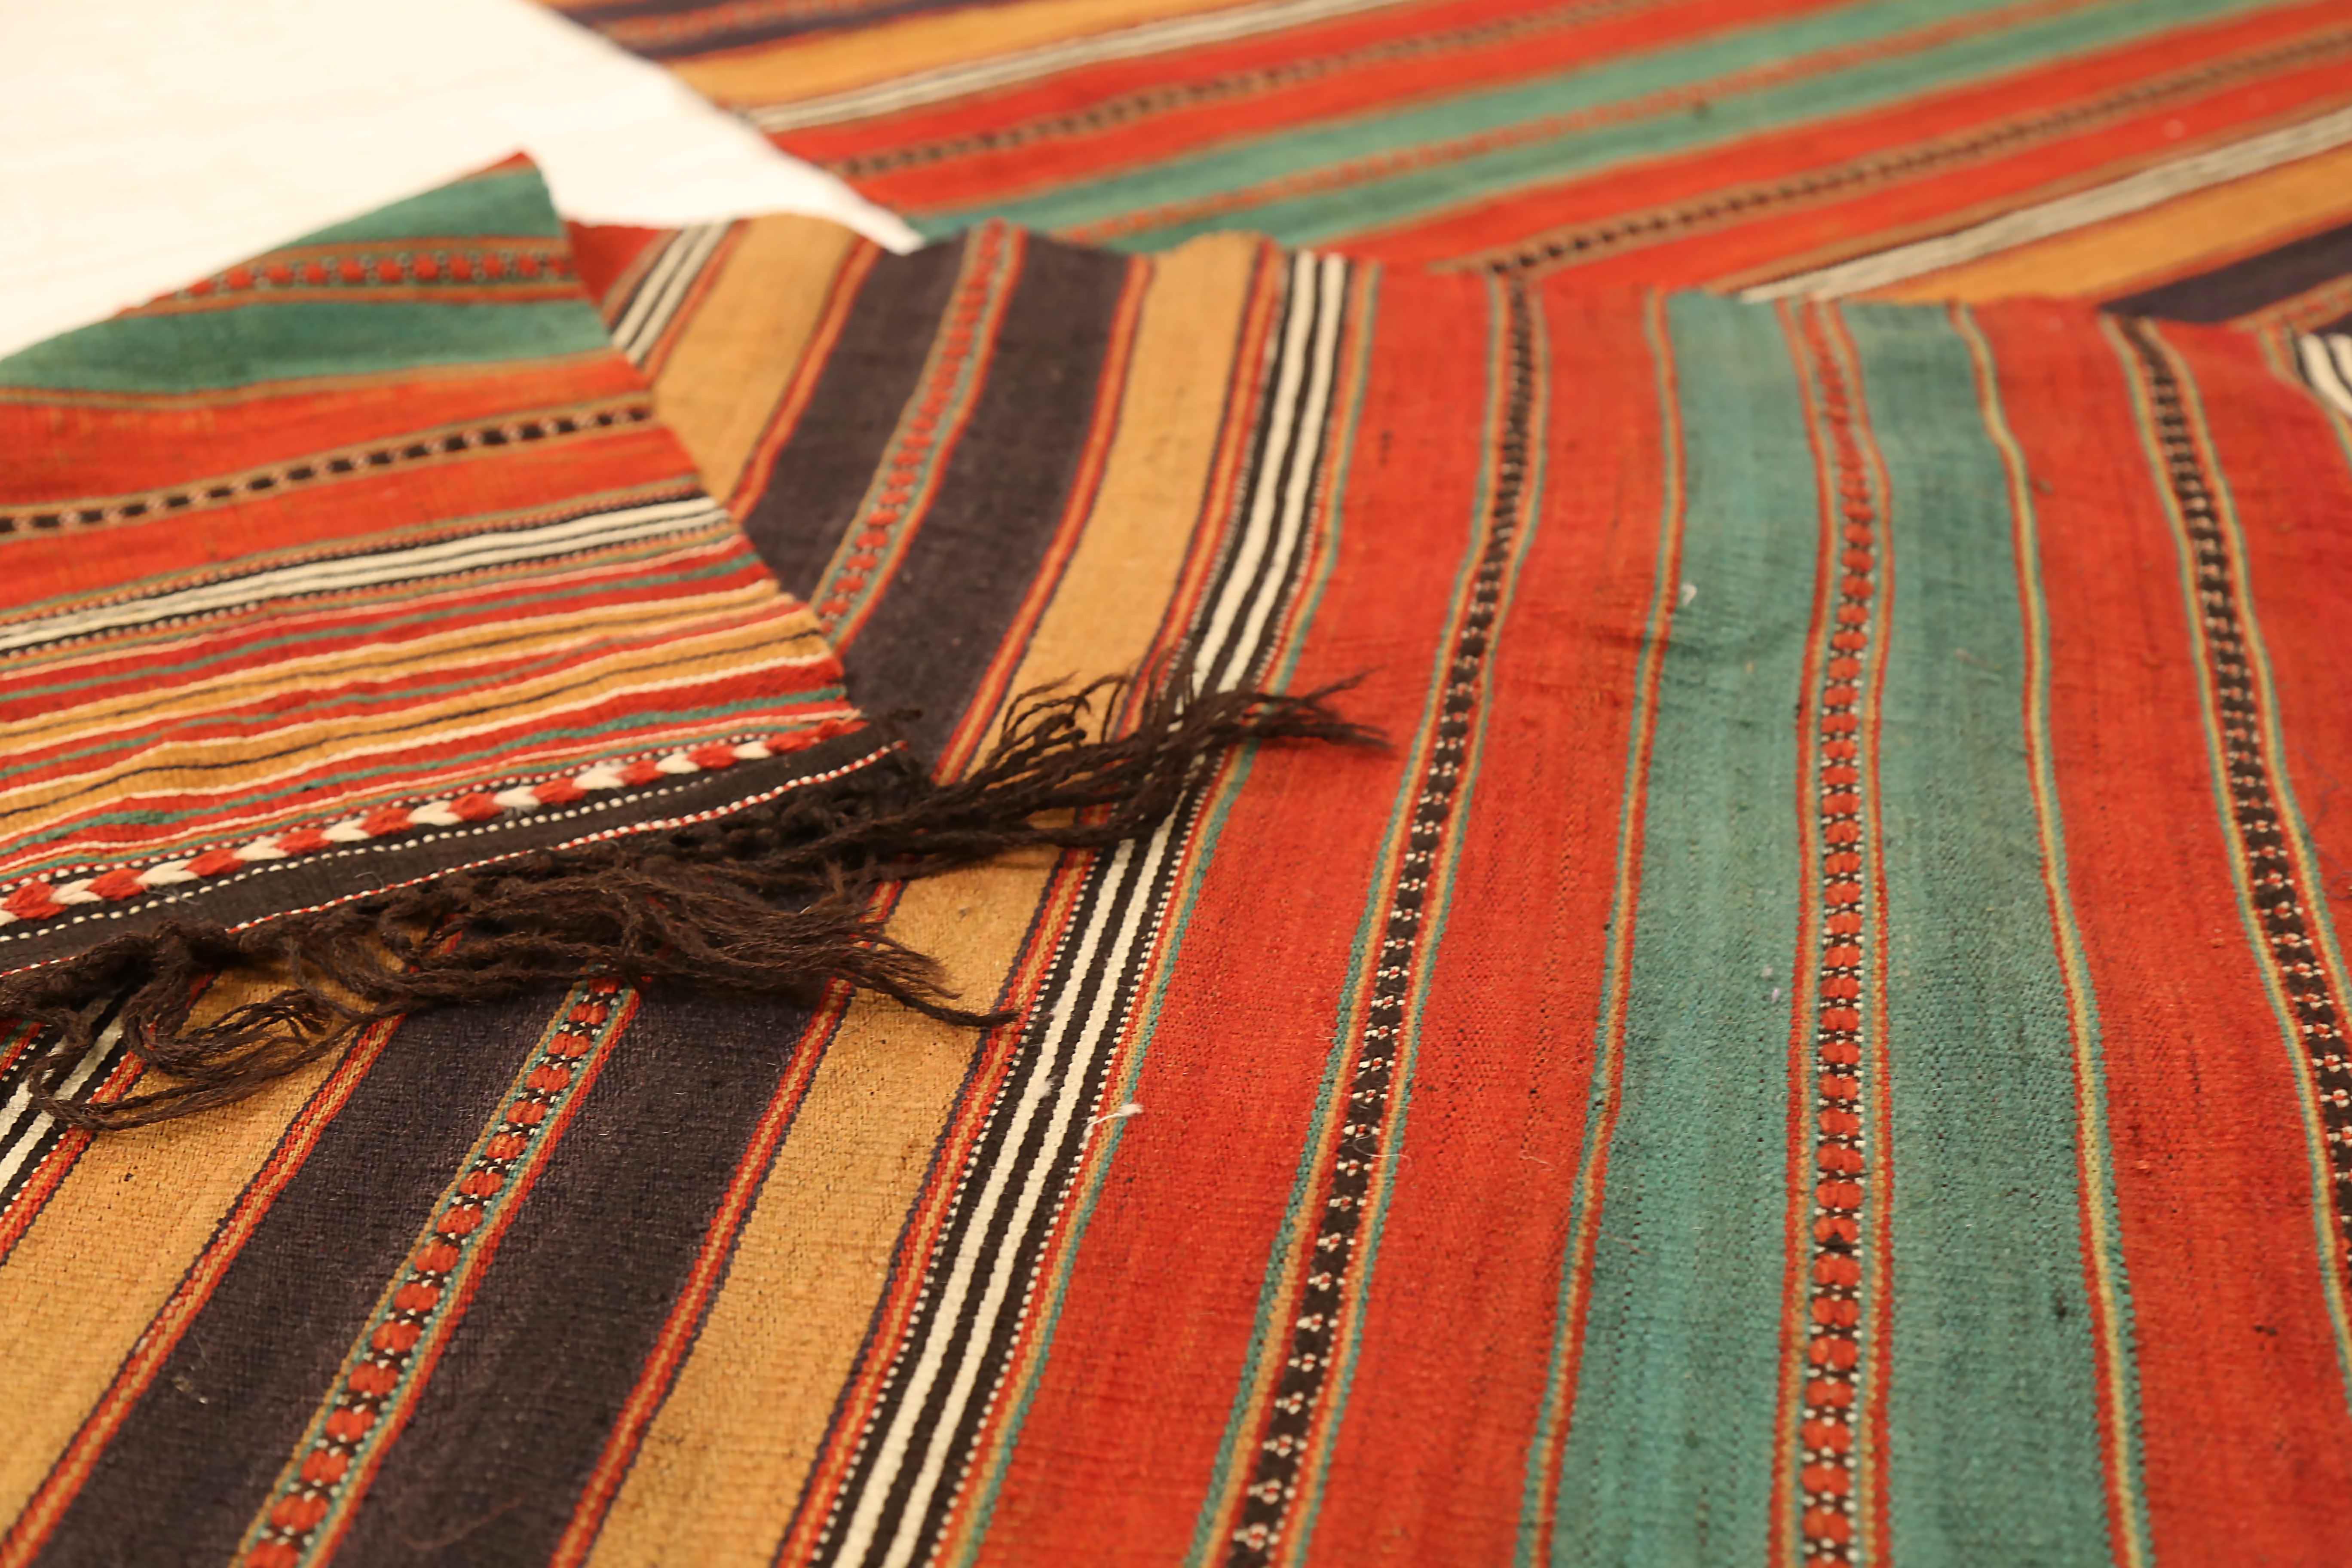 Antique Persian Kilim Runner Rug with Colored Stripes In Excellent Condition For Sale In Dallas, TX